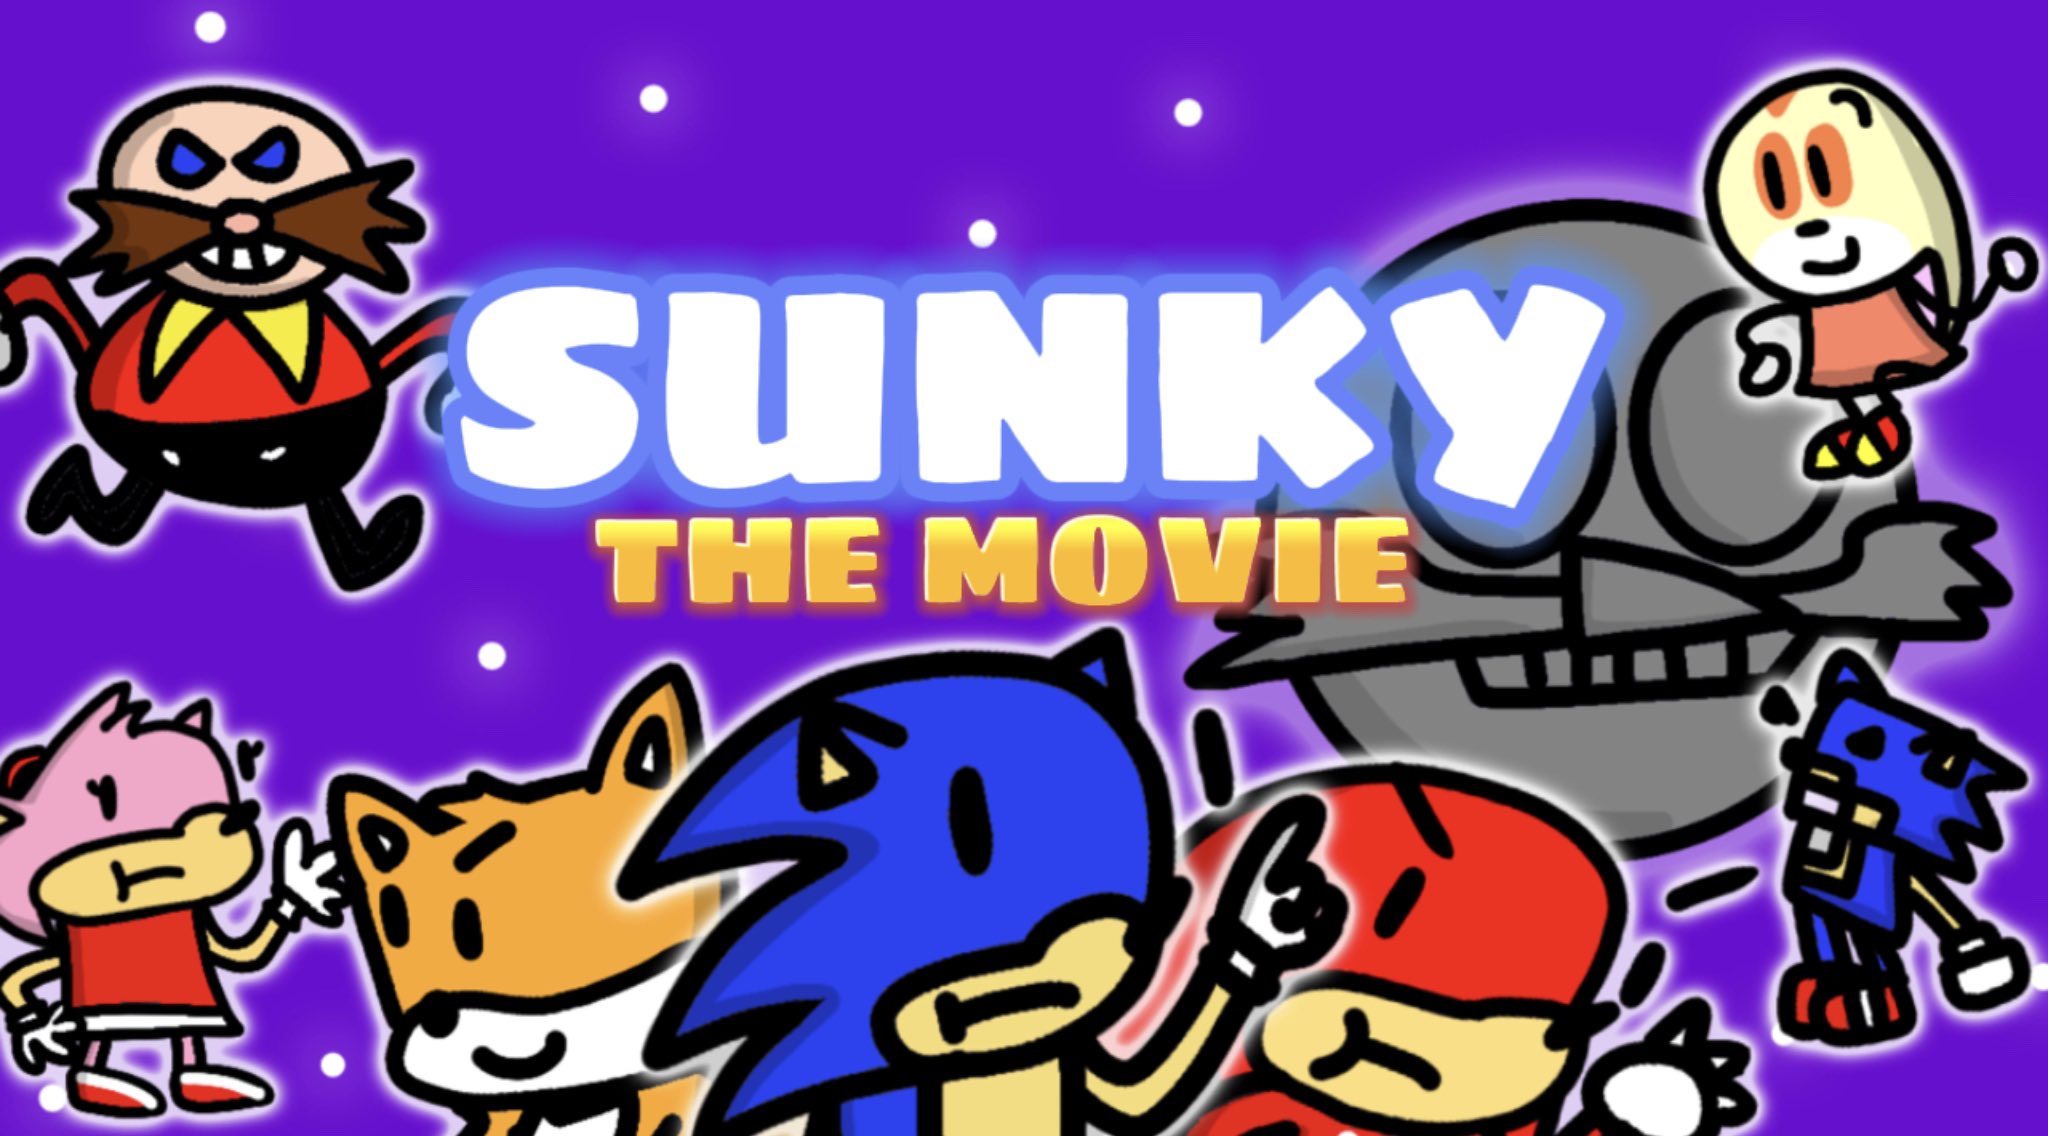 the sunky.mpg song got 3 inspirations from the 1st game for sunky.mpg. :  r/FridayNightFunkin